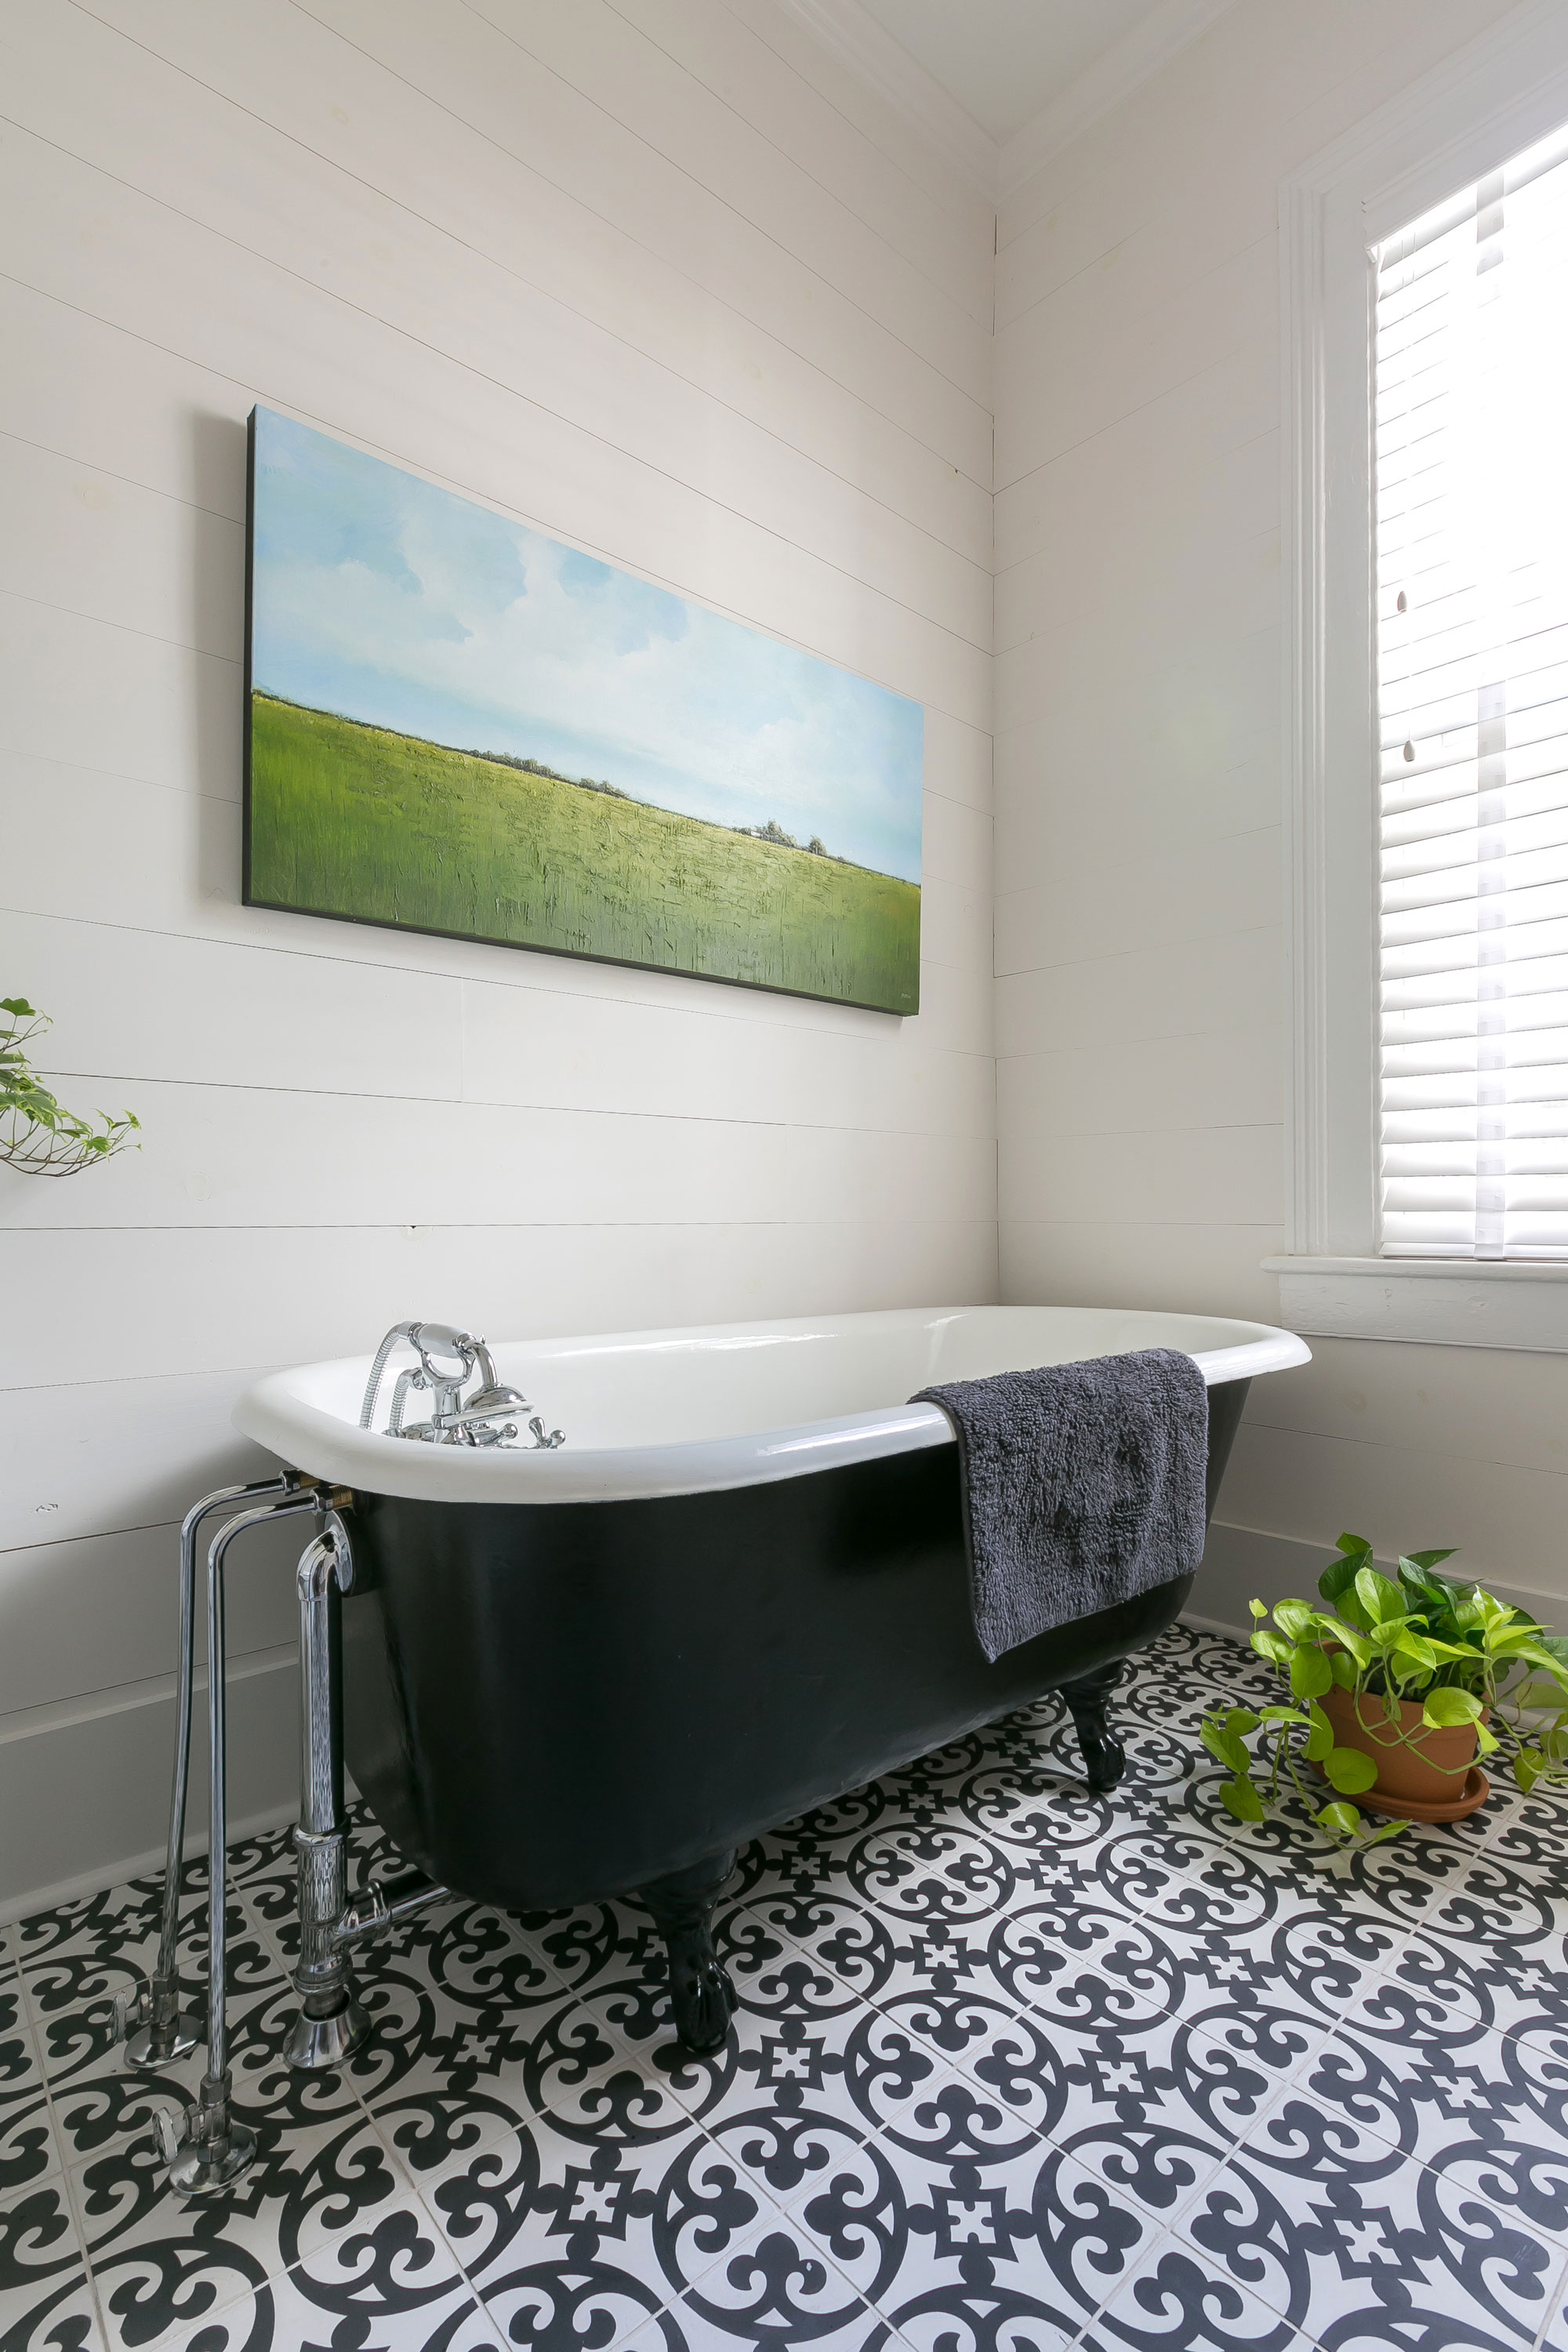 Doar house bathroom renovation with period details using modern fixture and amenities